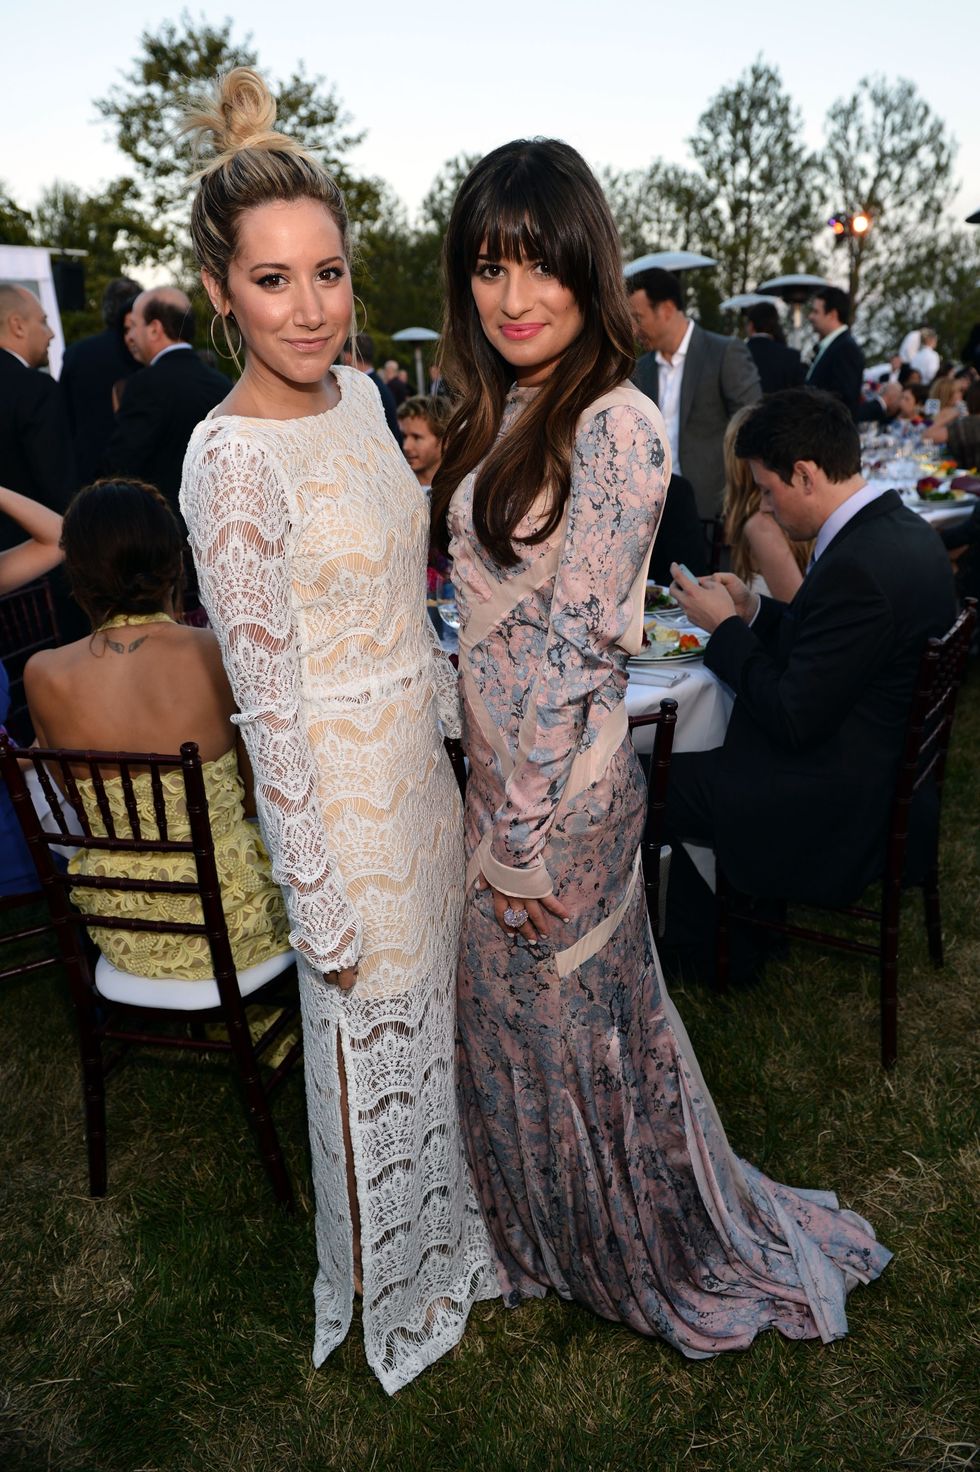 Ashley Tisdale and Lea Michele